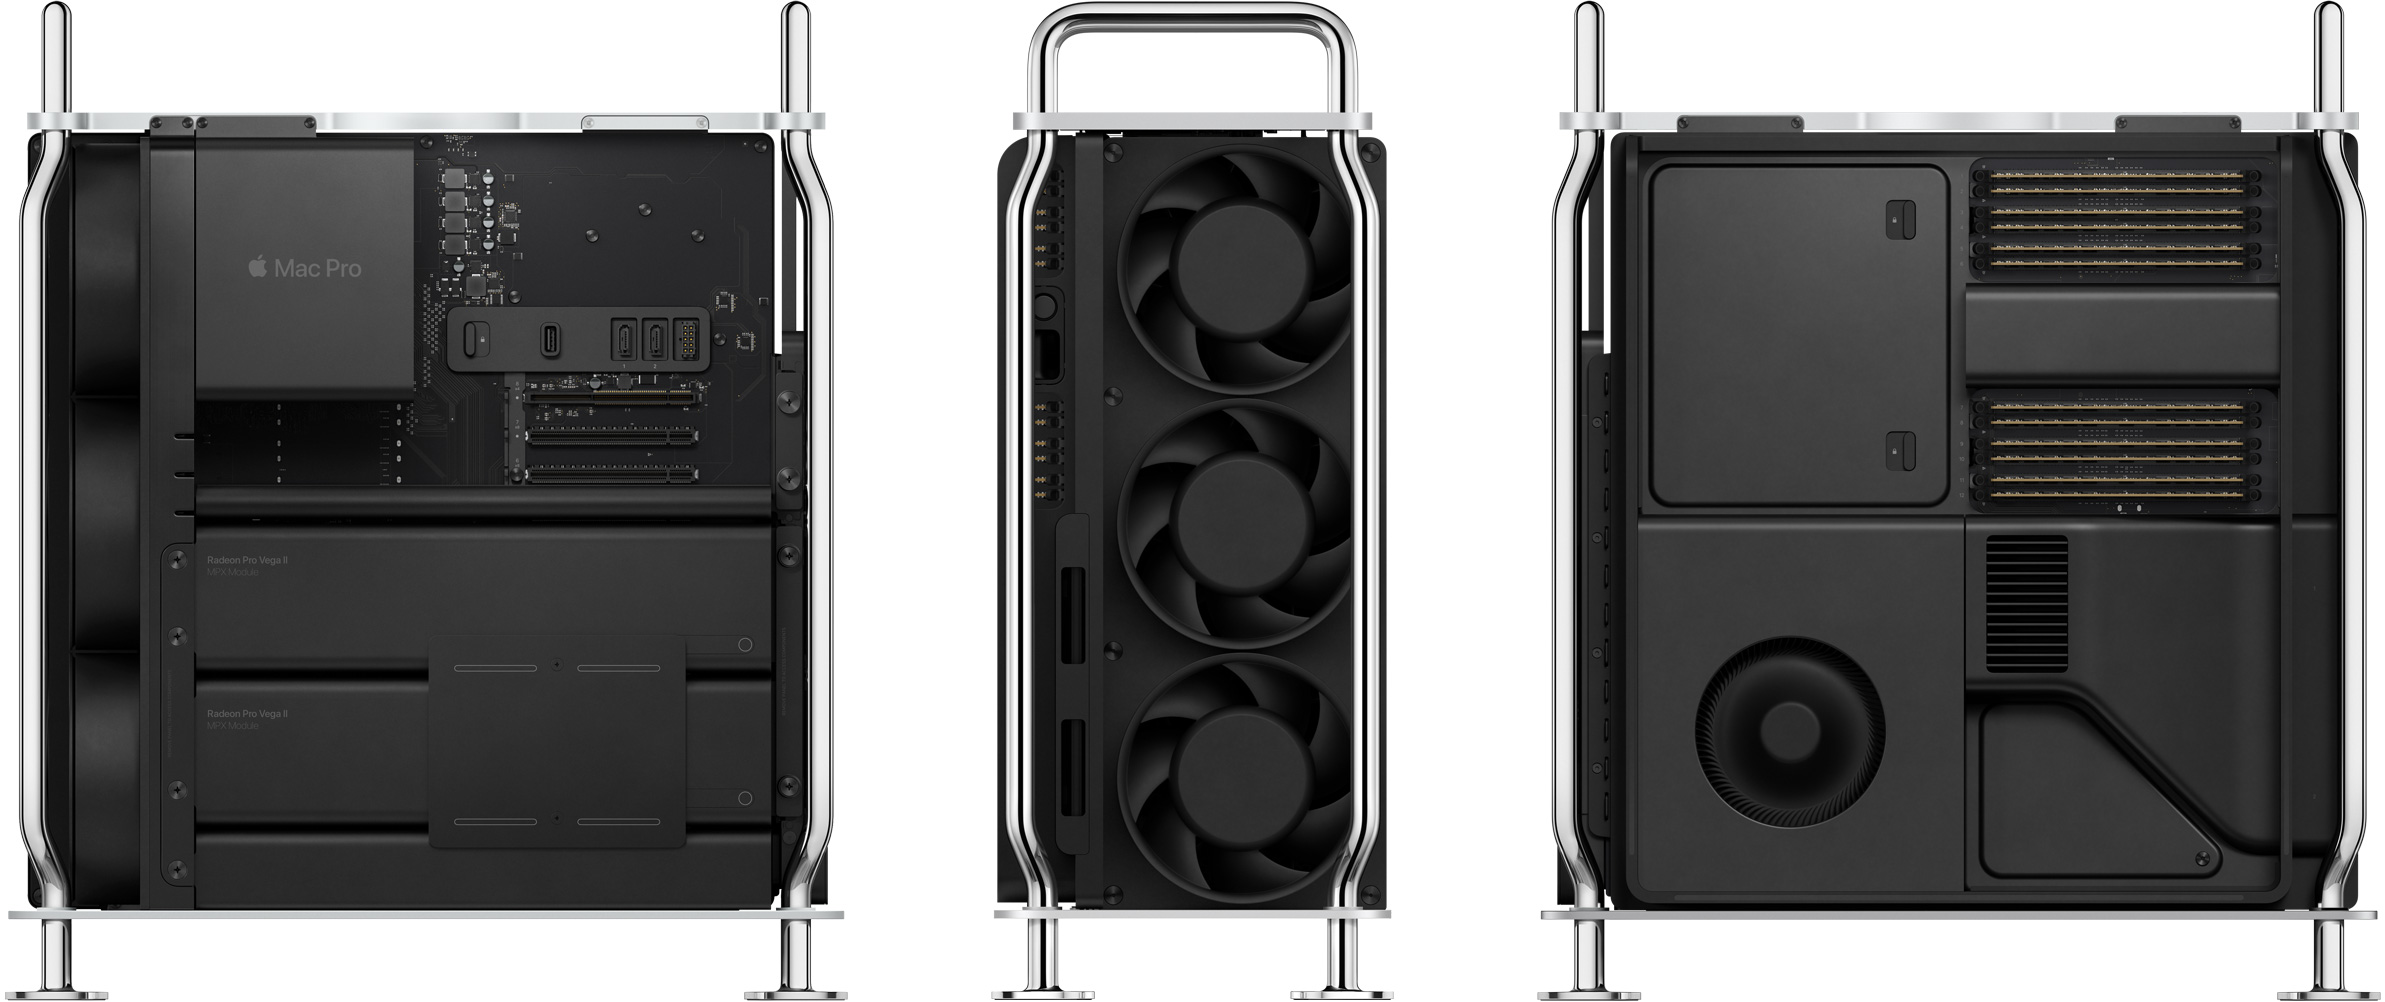 Apple's 2019 Mac Pro Tower Now Available: From $5,999 to $53,000